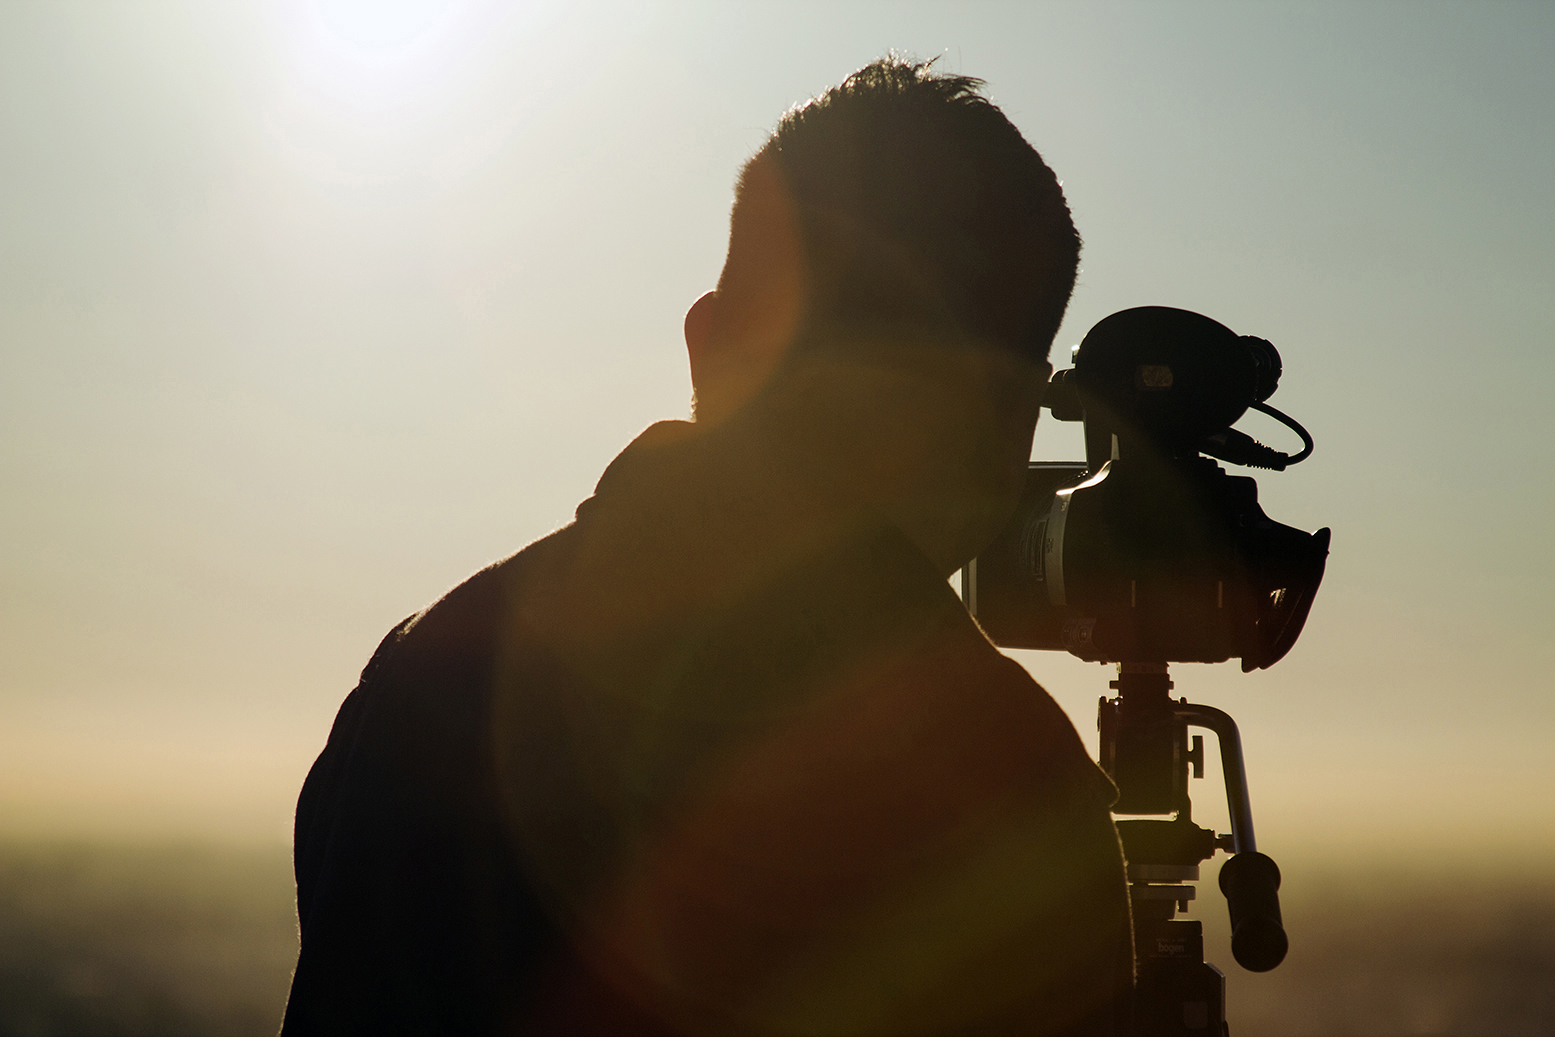 Aspiring Filmmaker shoots a time lapse outdoor in beautiful weather with sun rays around.